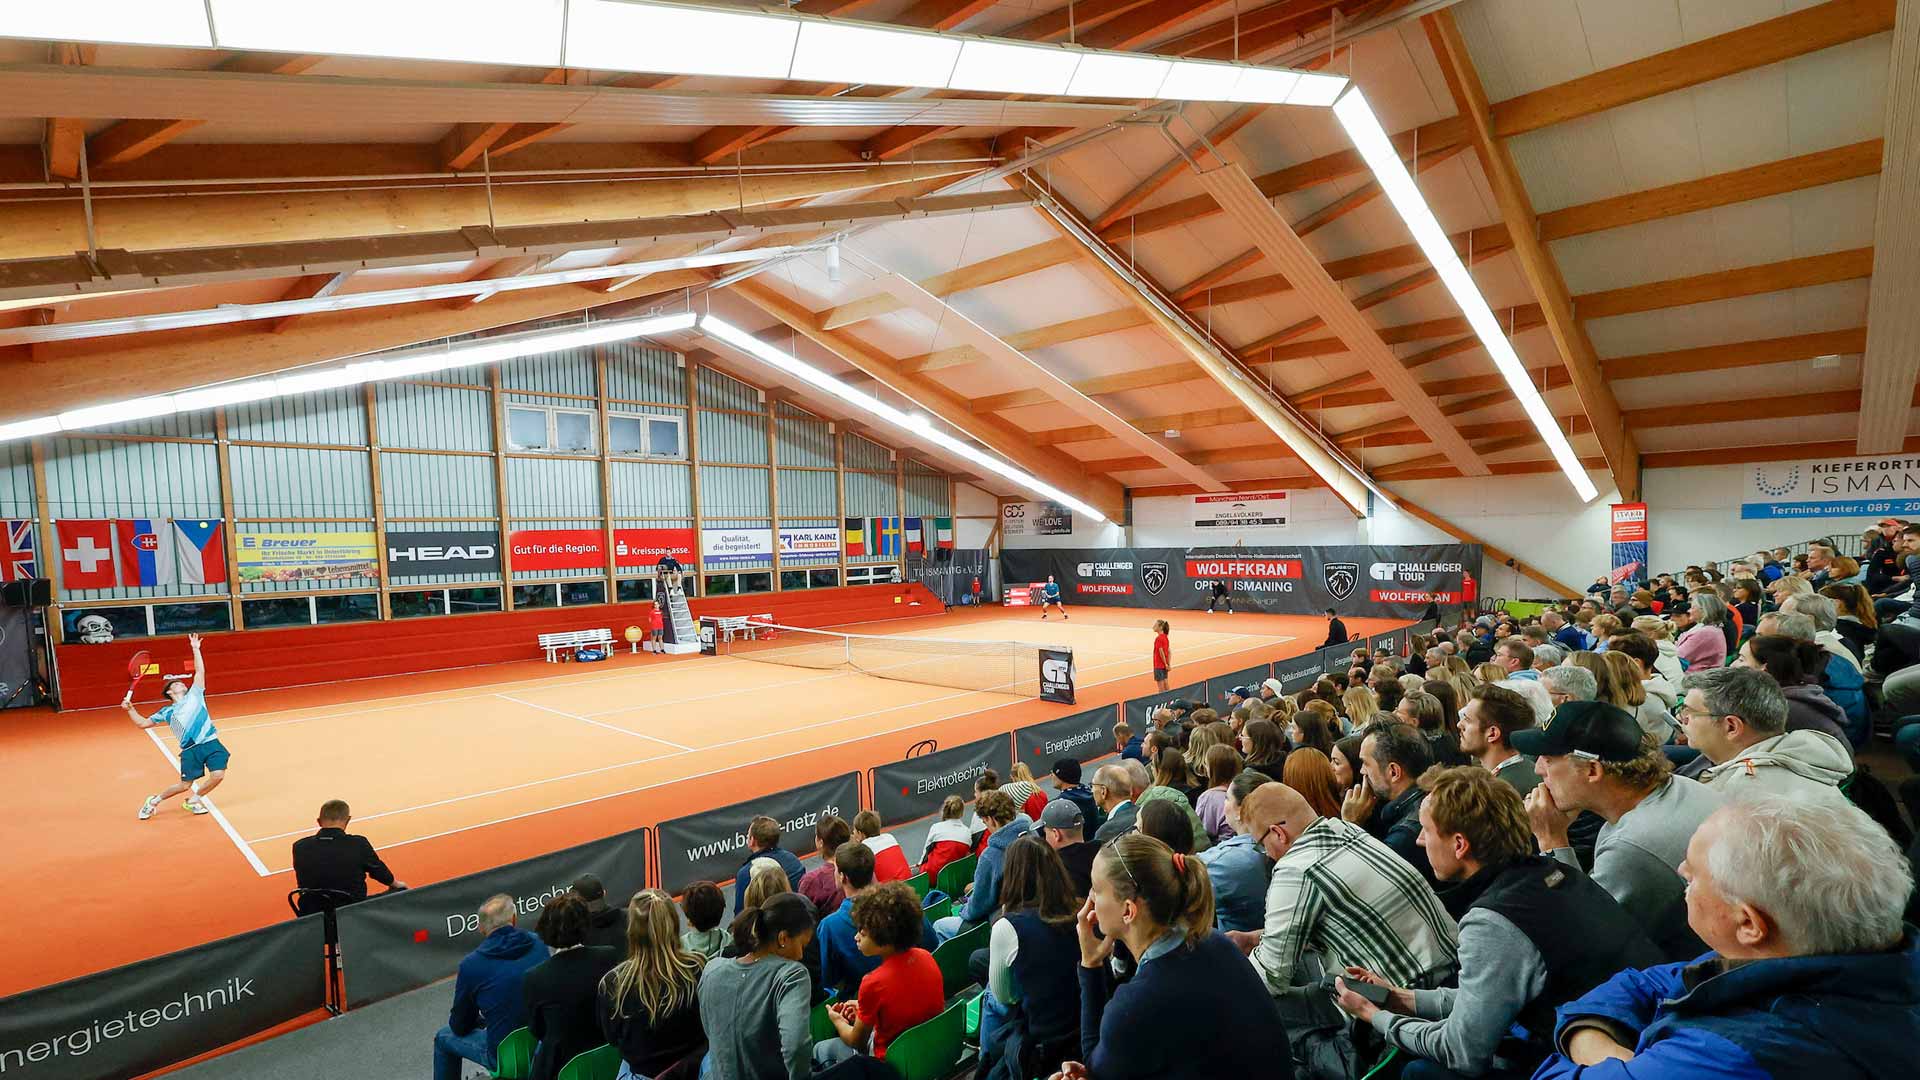 The Wolffkran Open by Tannenhof takes place in Ismaning, Germany.